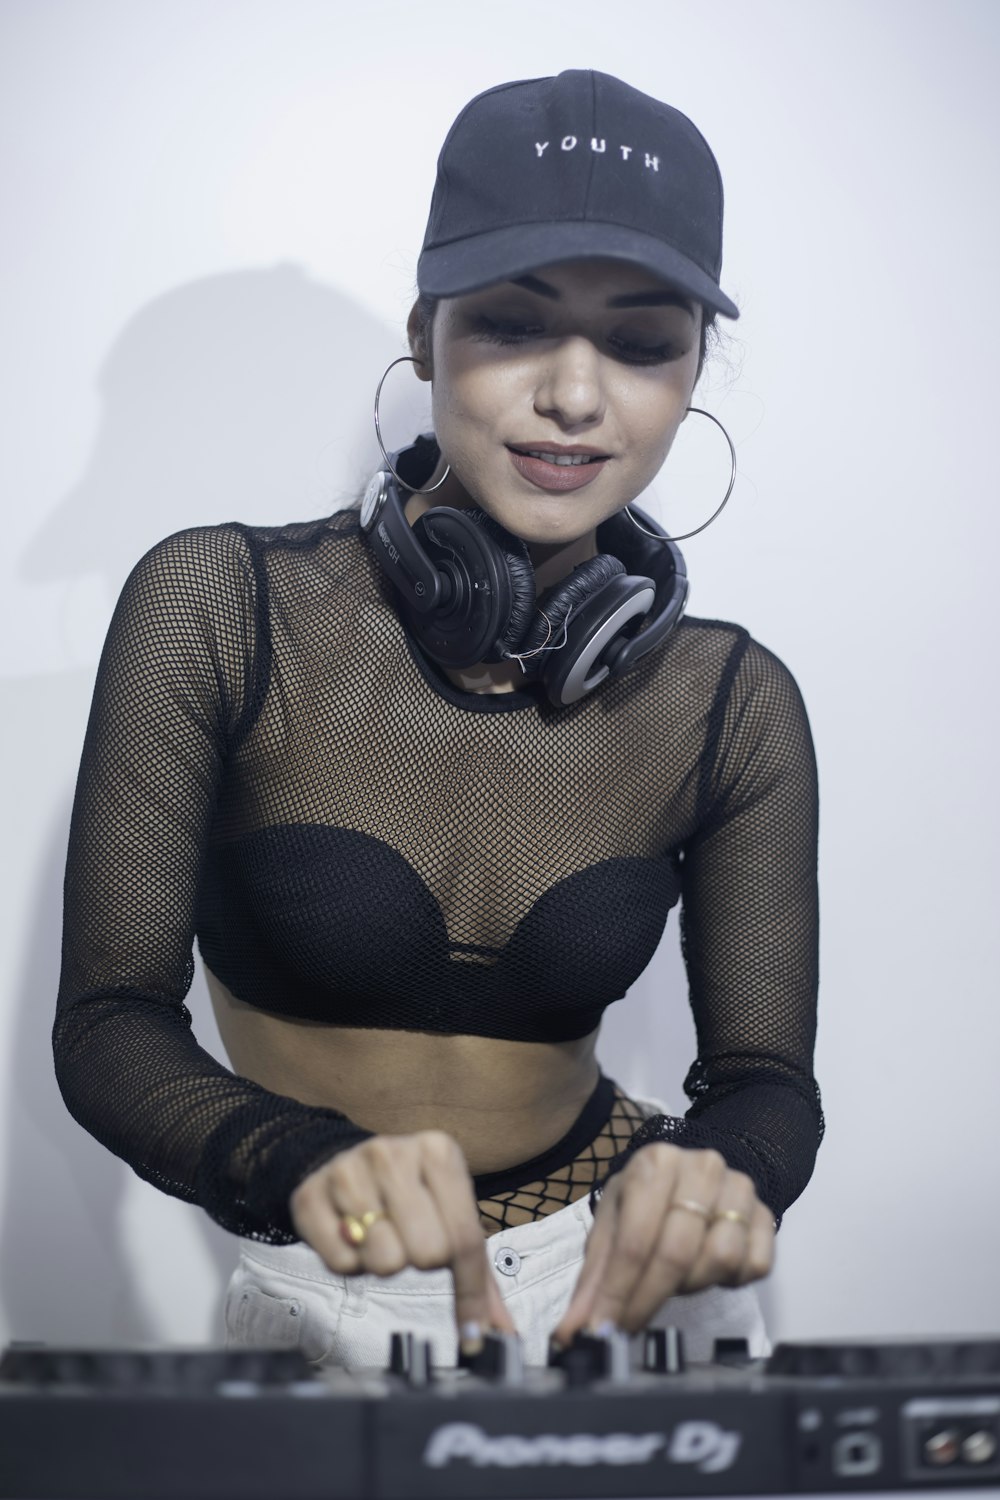 a woman wearing headphones and a black top